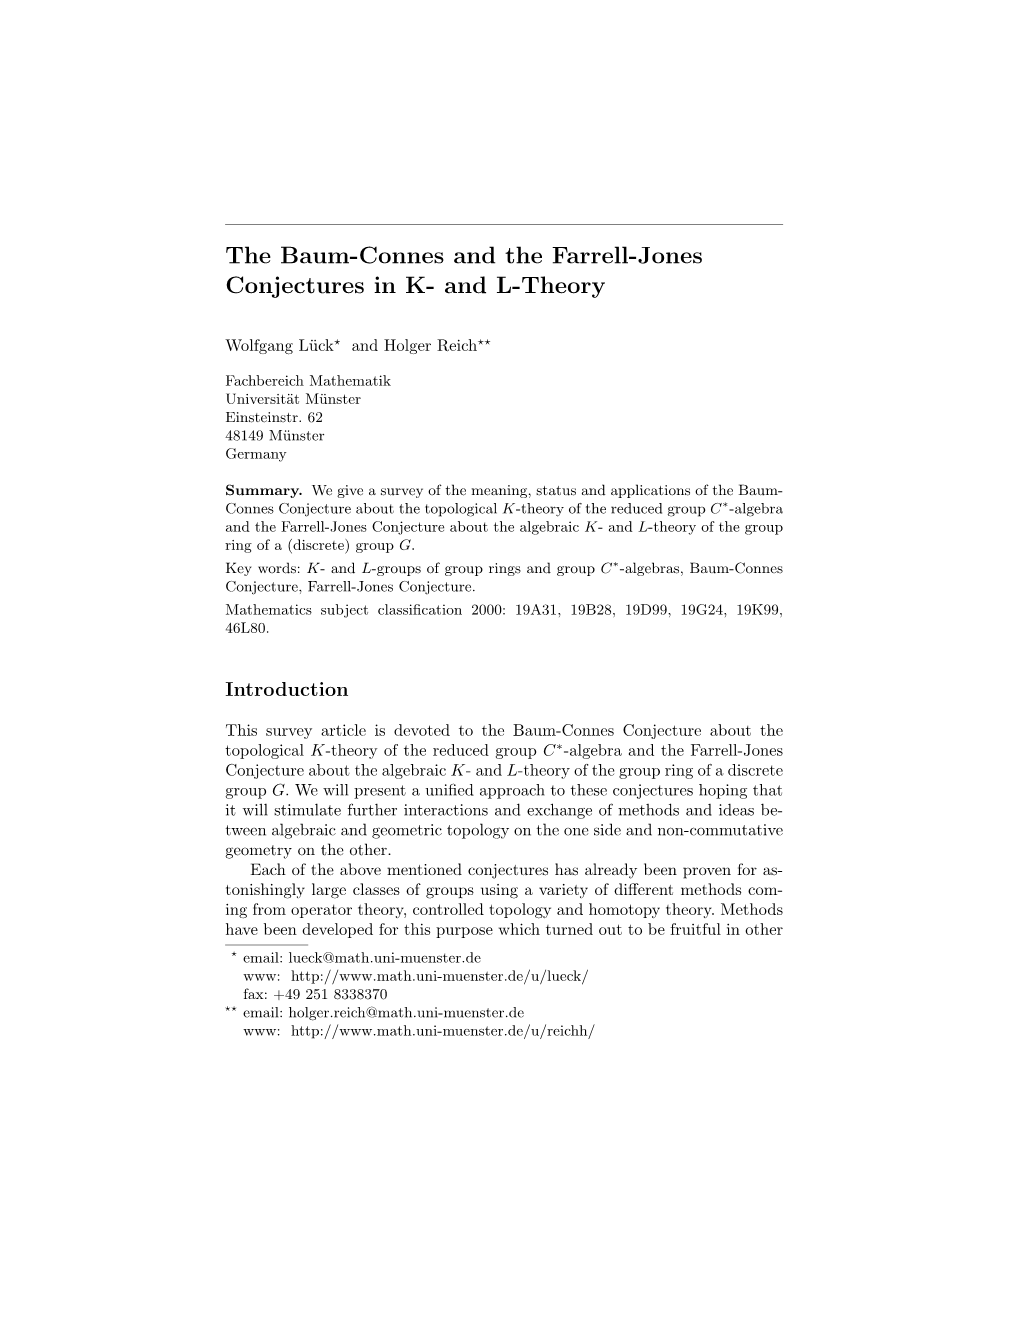 The Baum-Connes and the Farrell-Jones Conjectures in K- and L-Theory